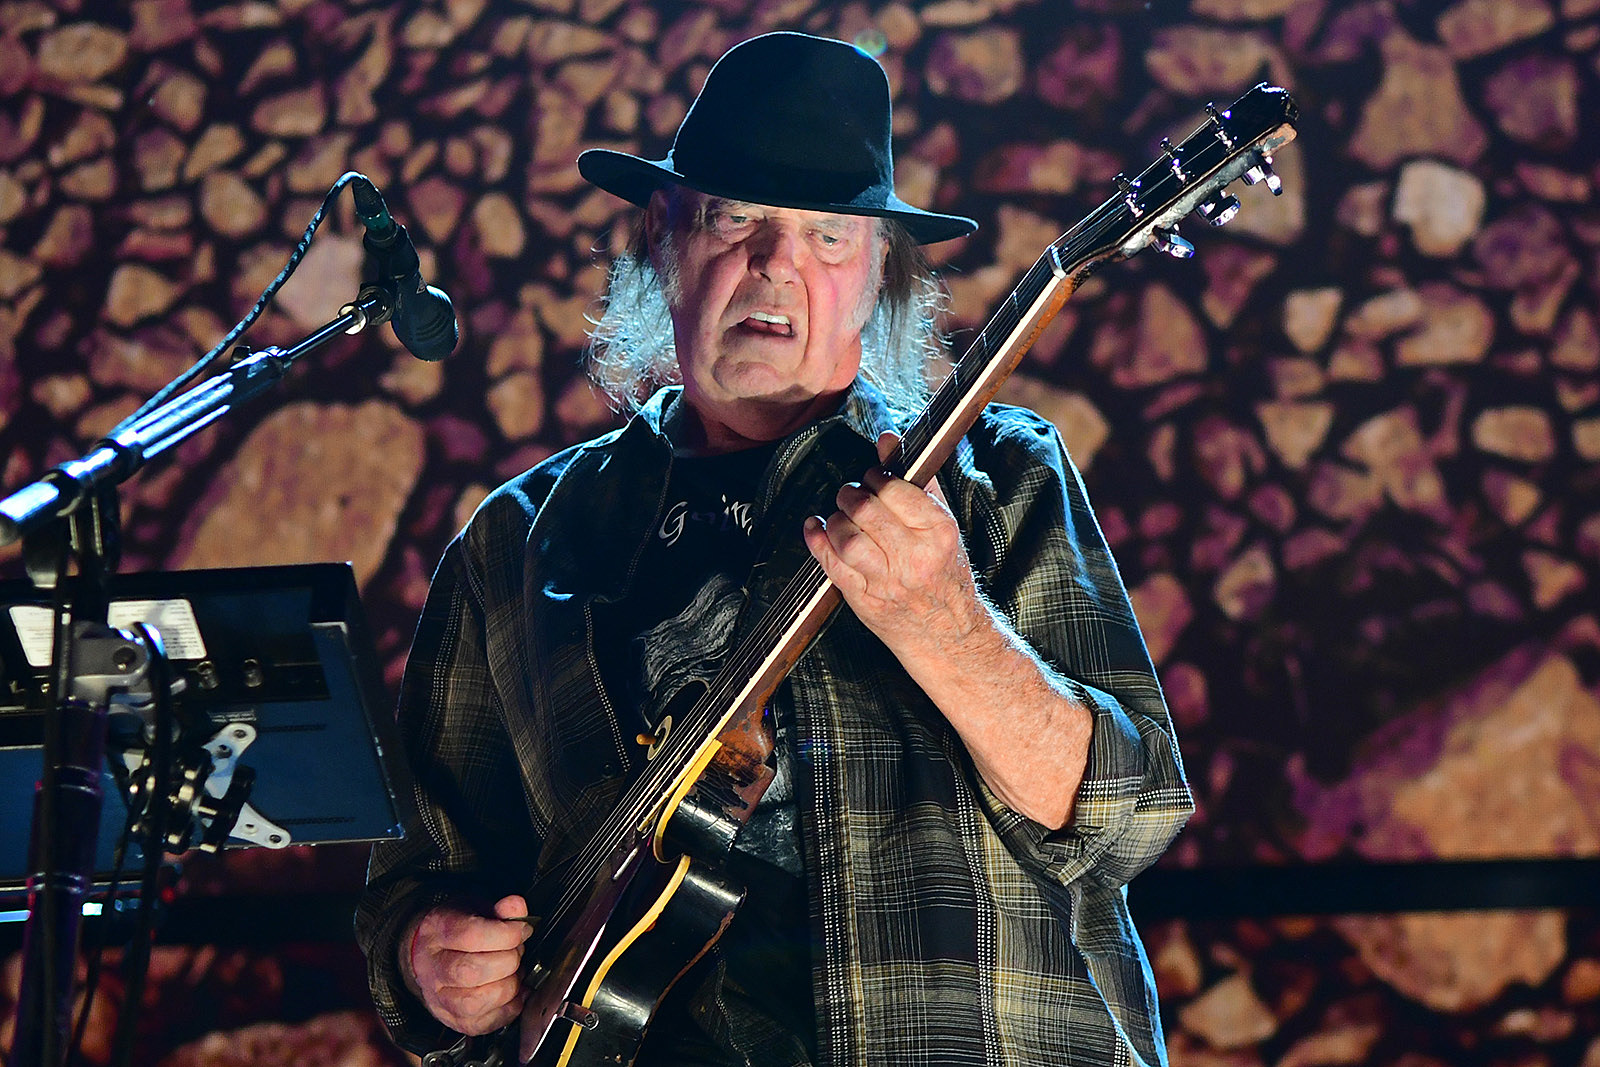 Neil Young ‘Already Planning’ Follow-Up to New LP ‘Barn’